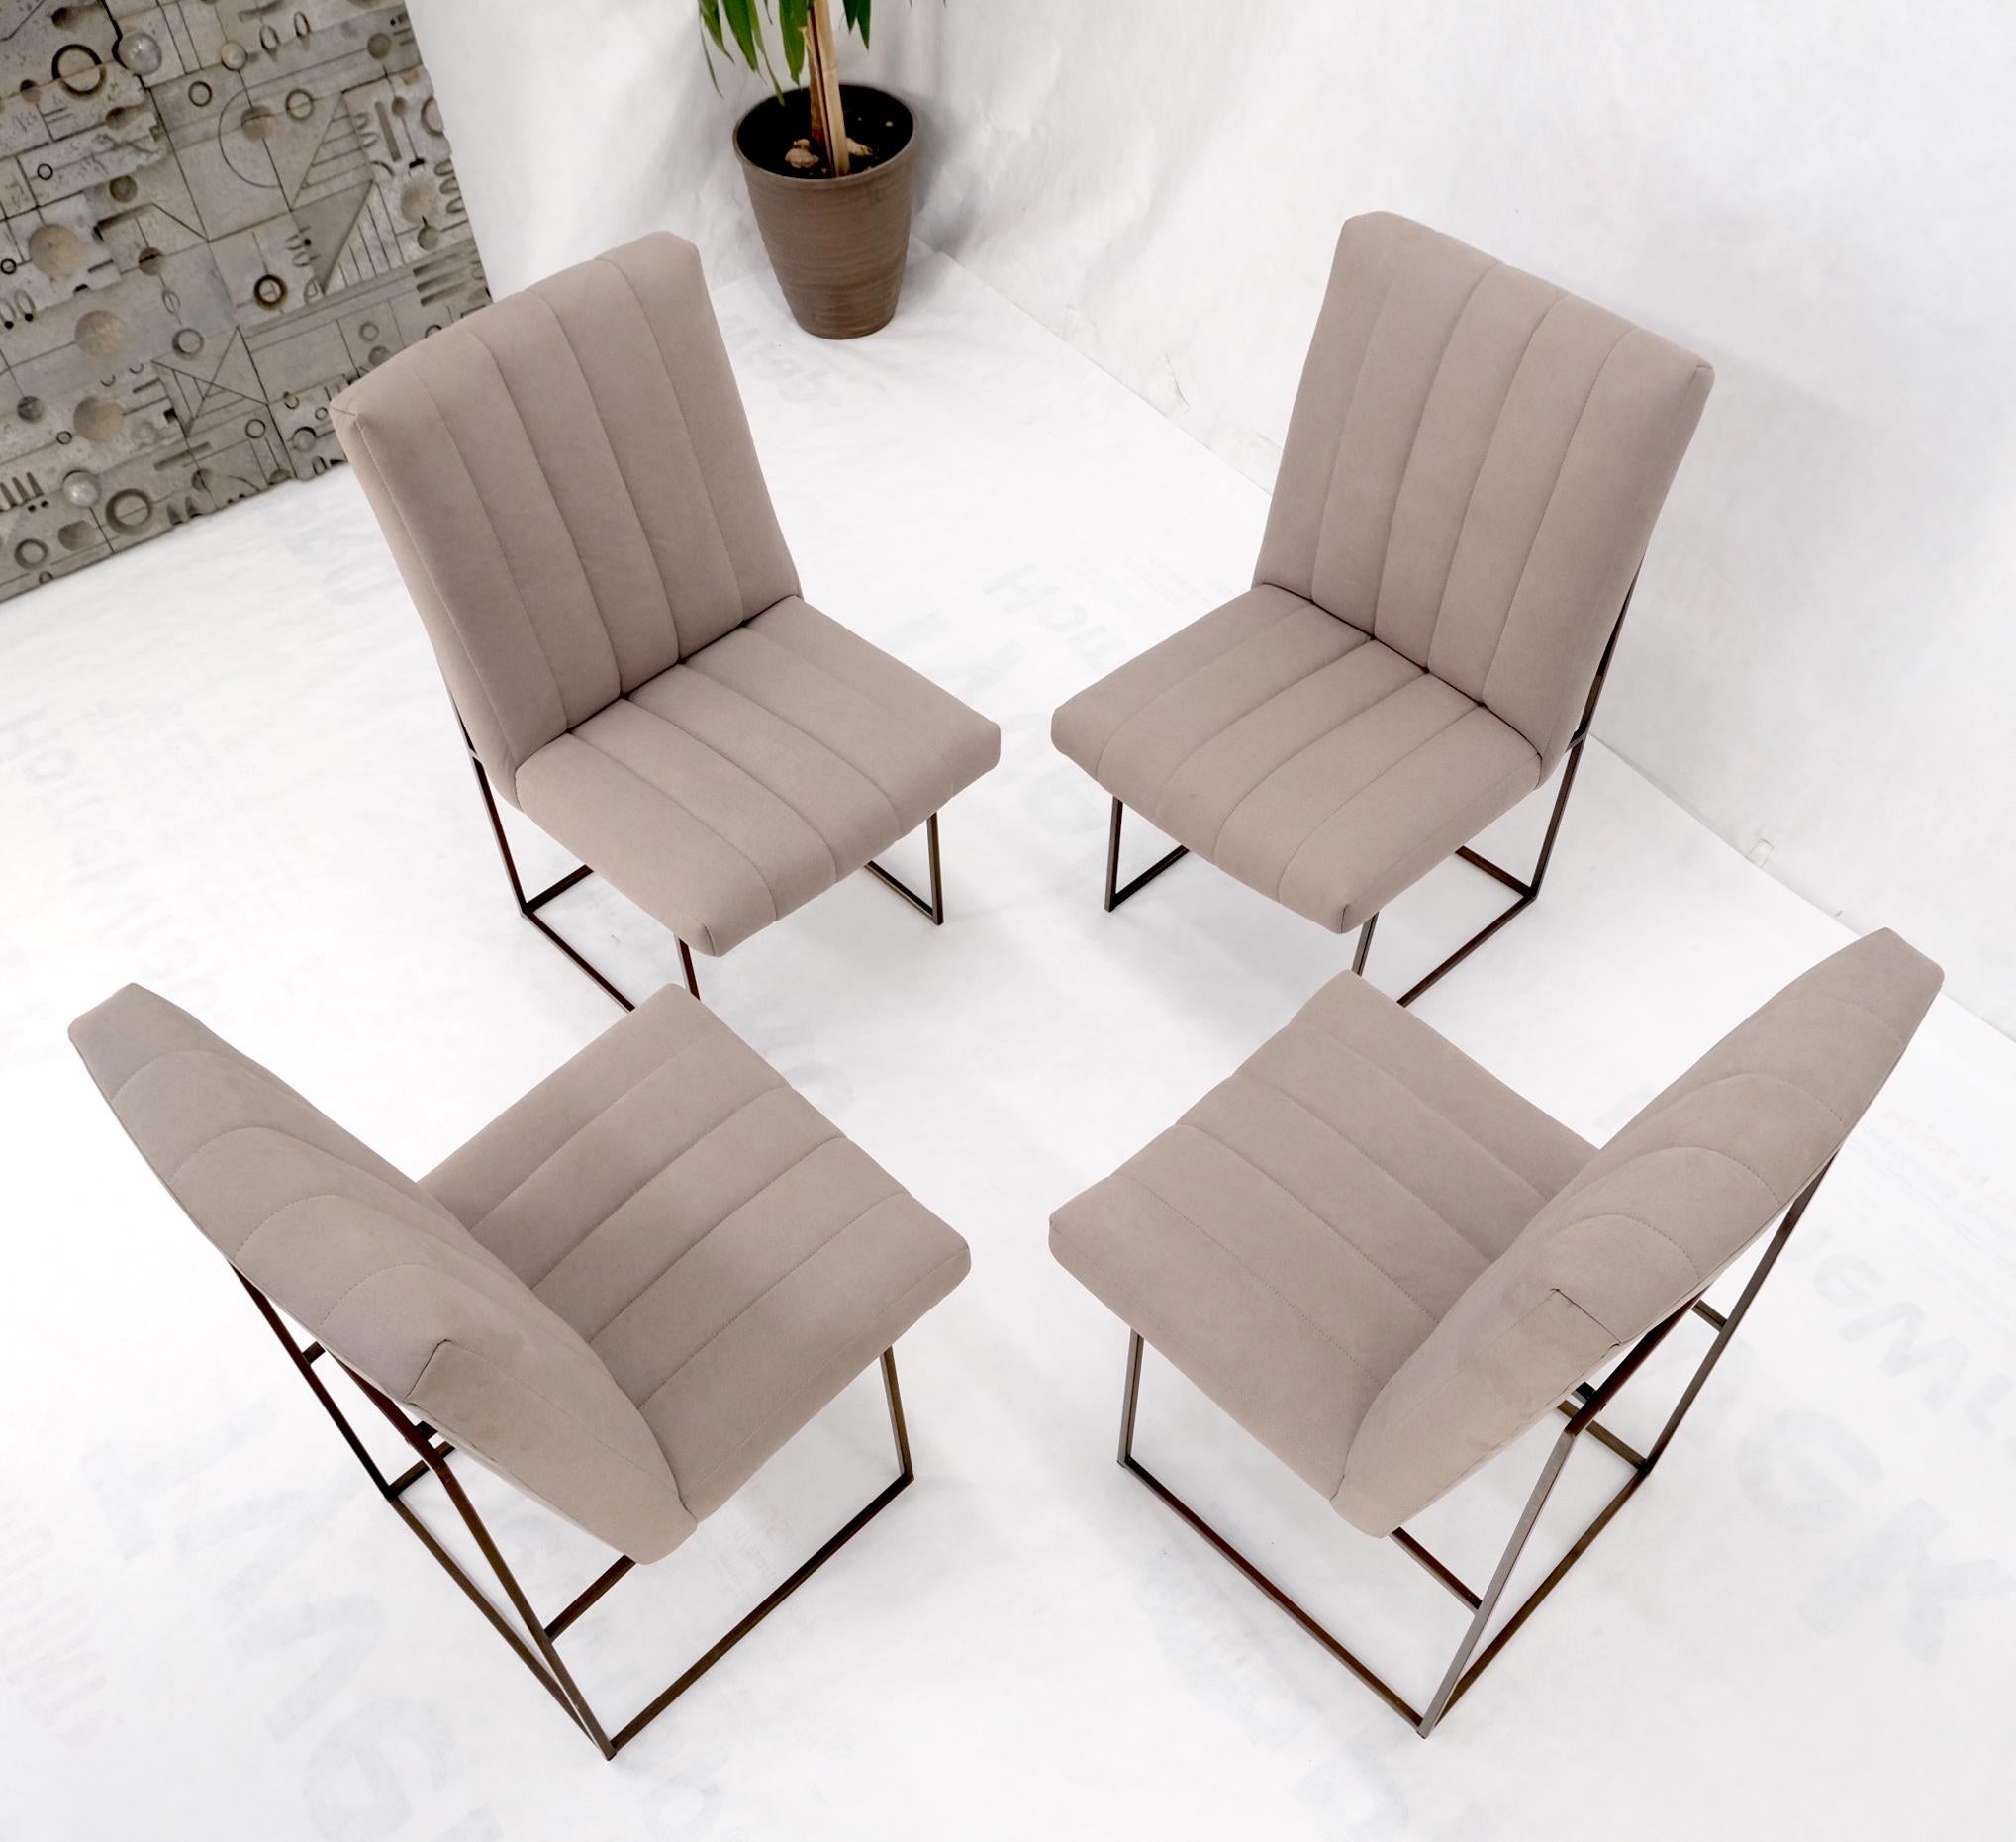 Set of 4 Milo Baughman Mid-Century Modern Dining Chairs New Alcantera Upholstery For Sale 2